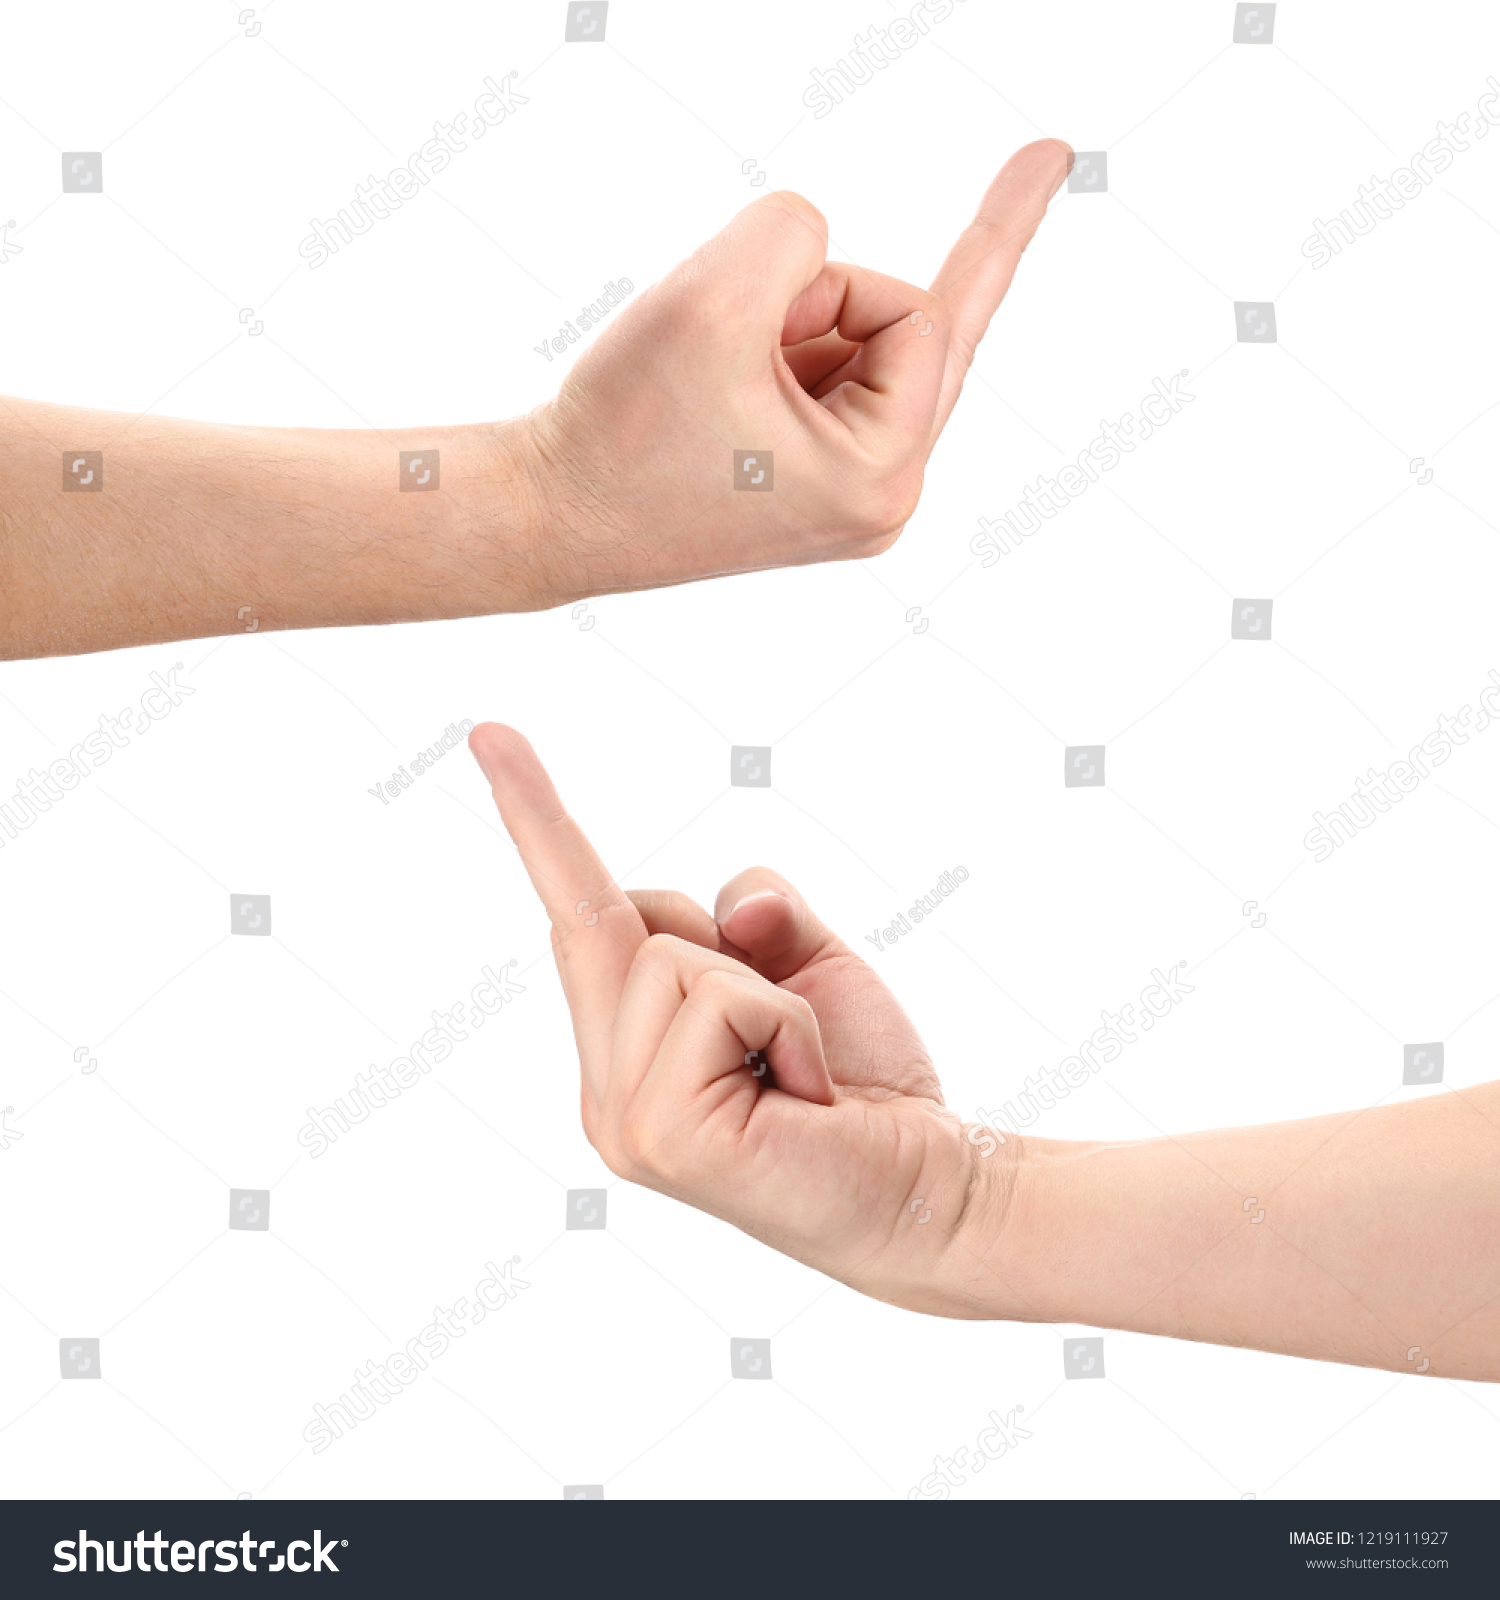 Hands showing rude gestures, isolated on white background #1219111927